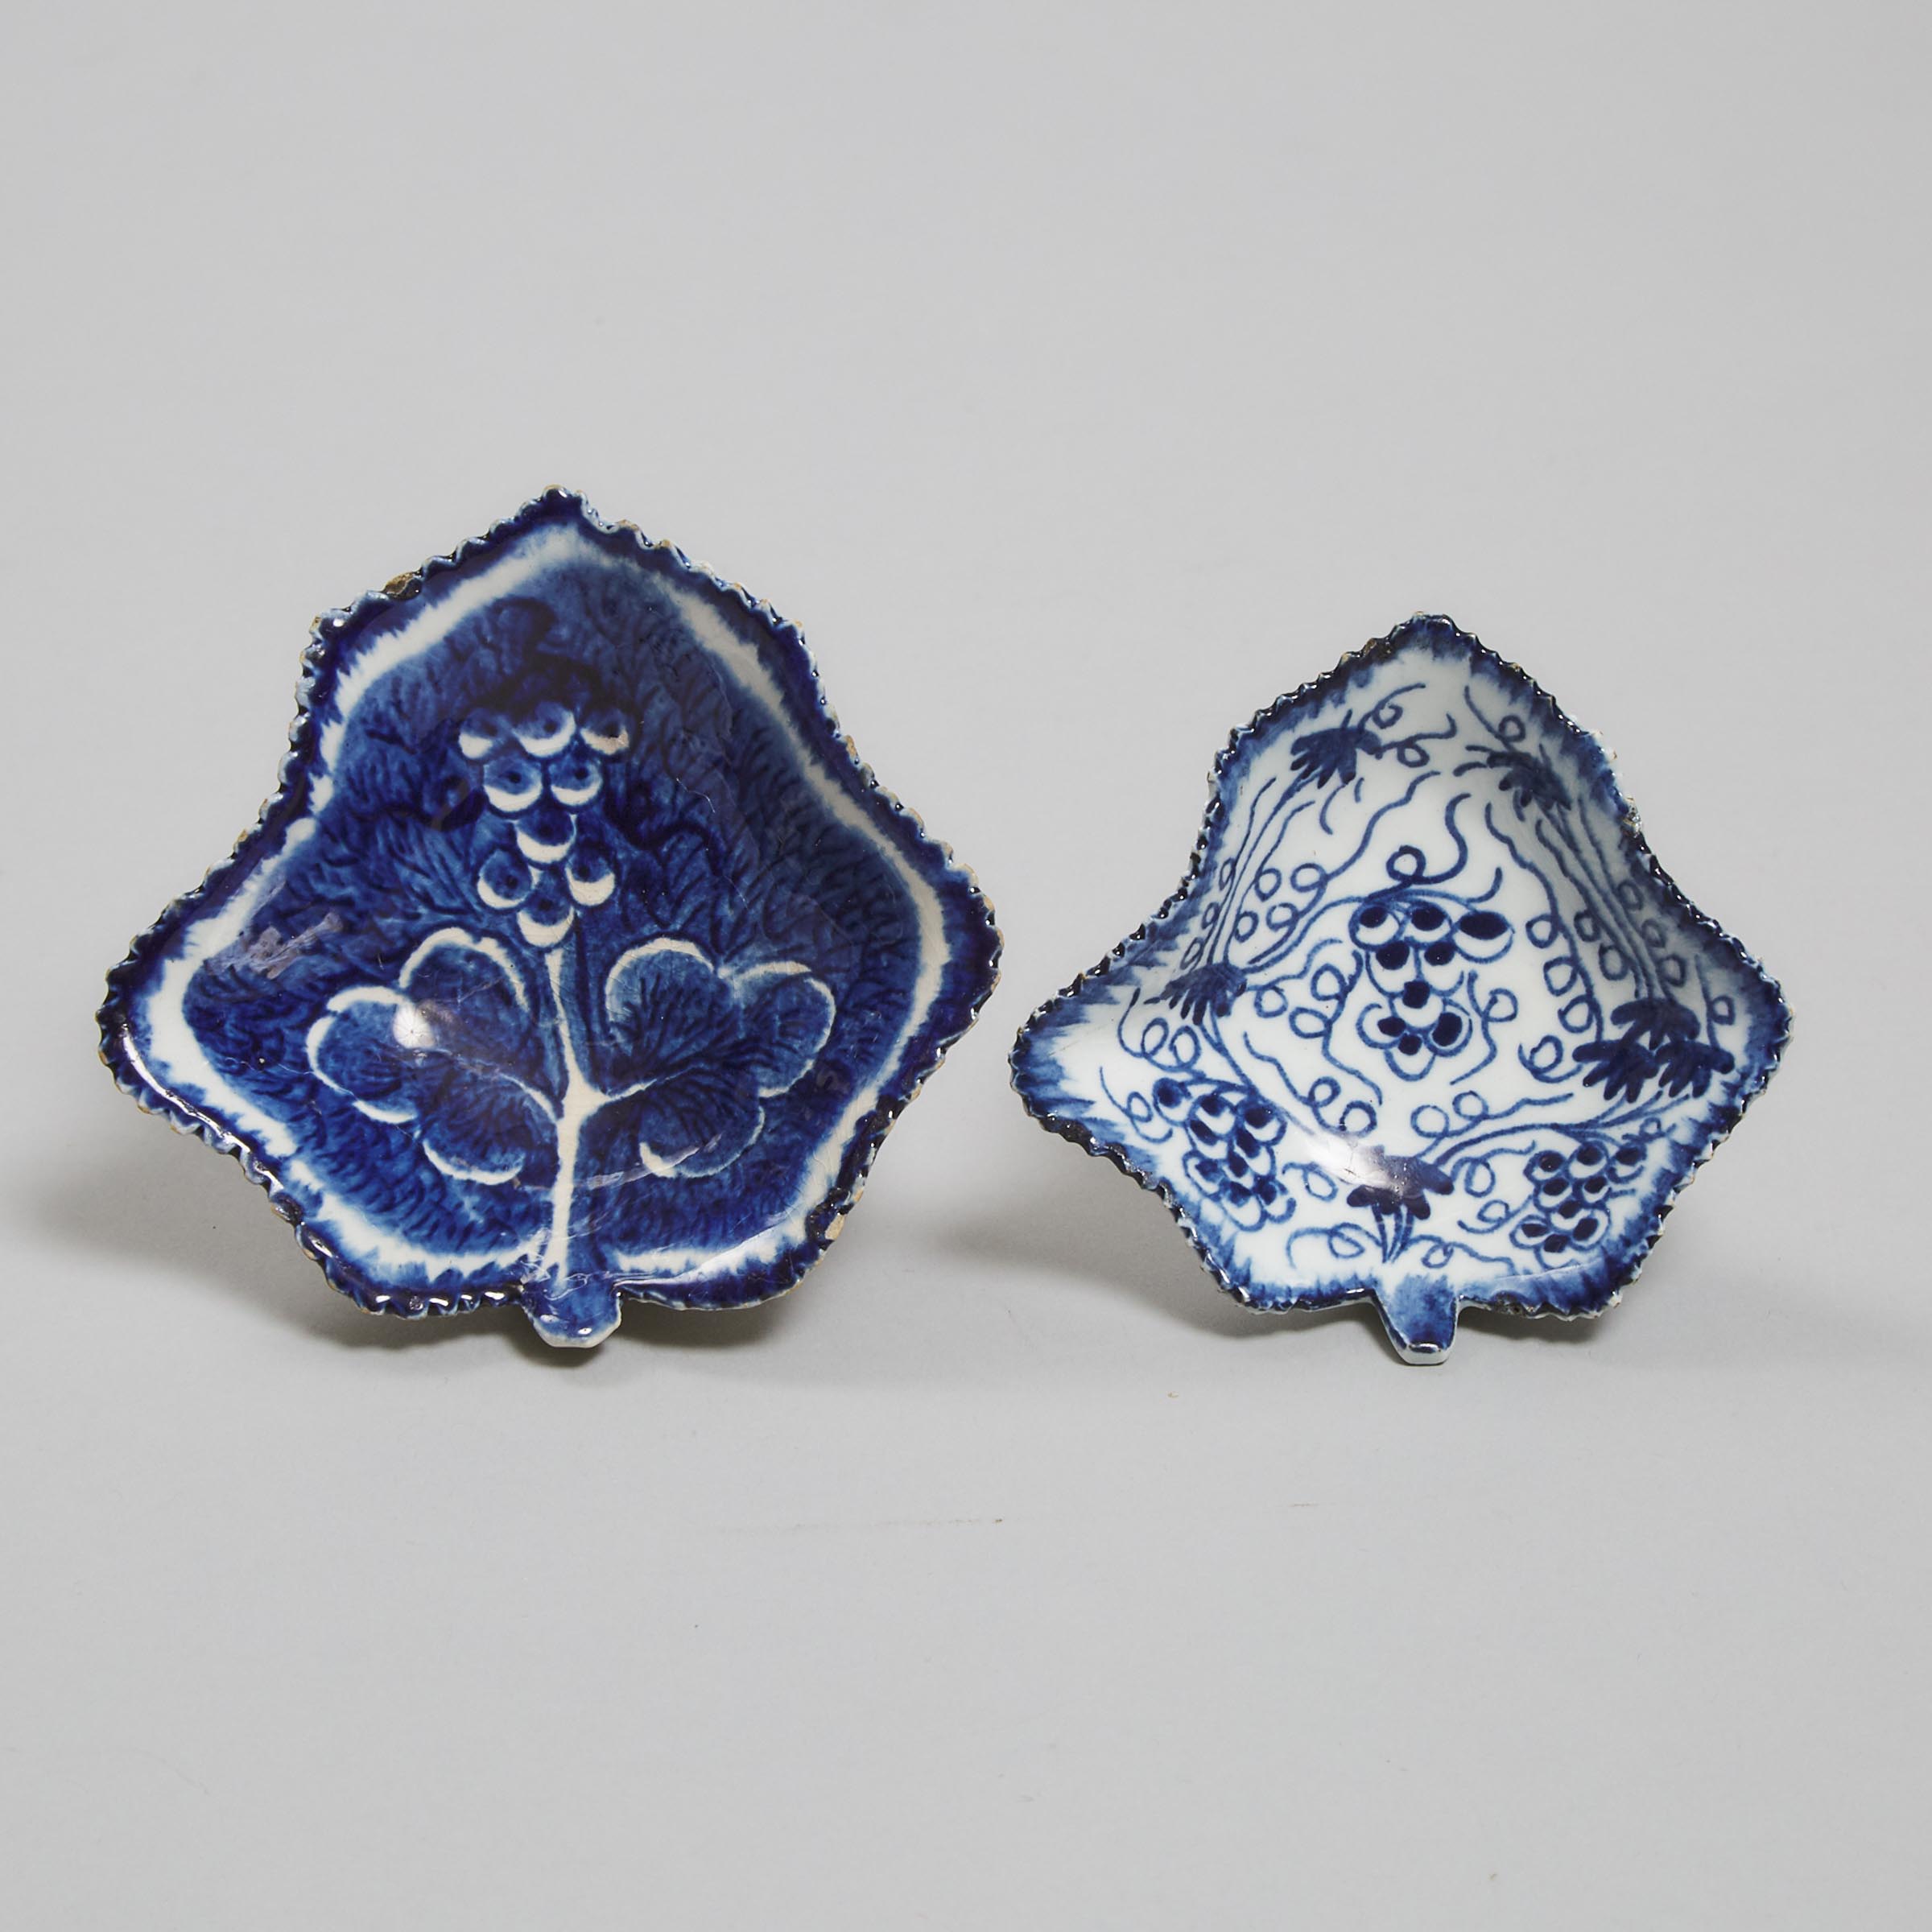 Two Bow Leaf Shaped Pickle Dishes, c.1760-65